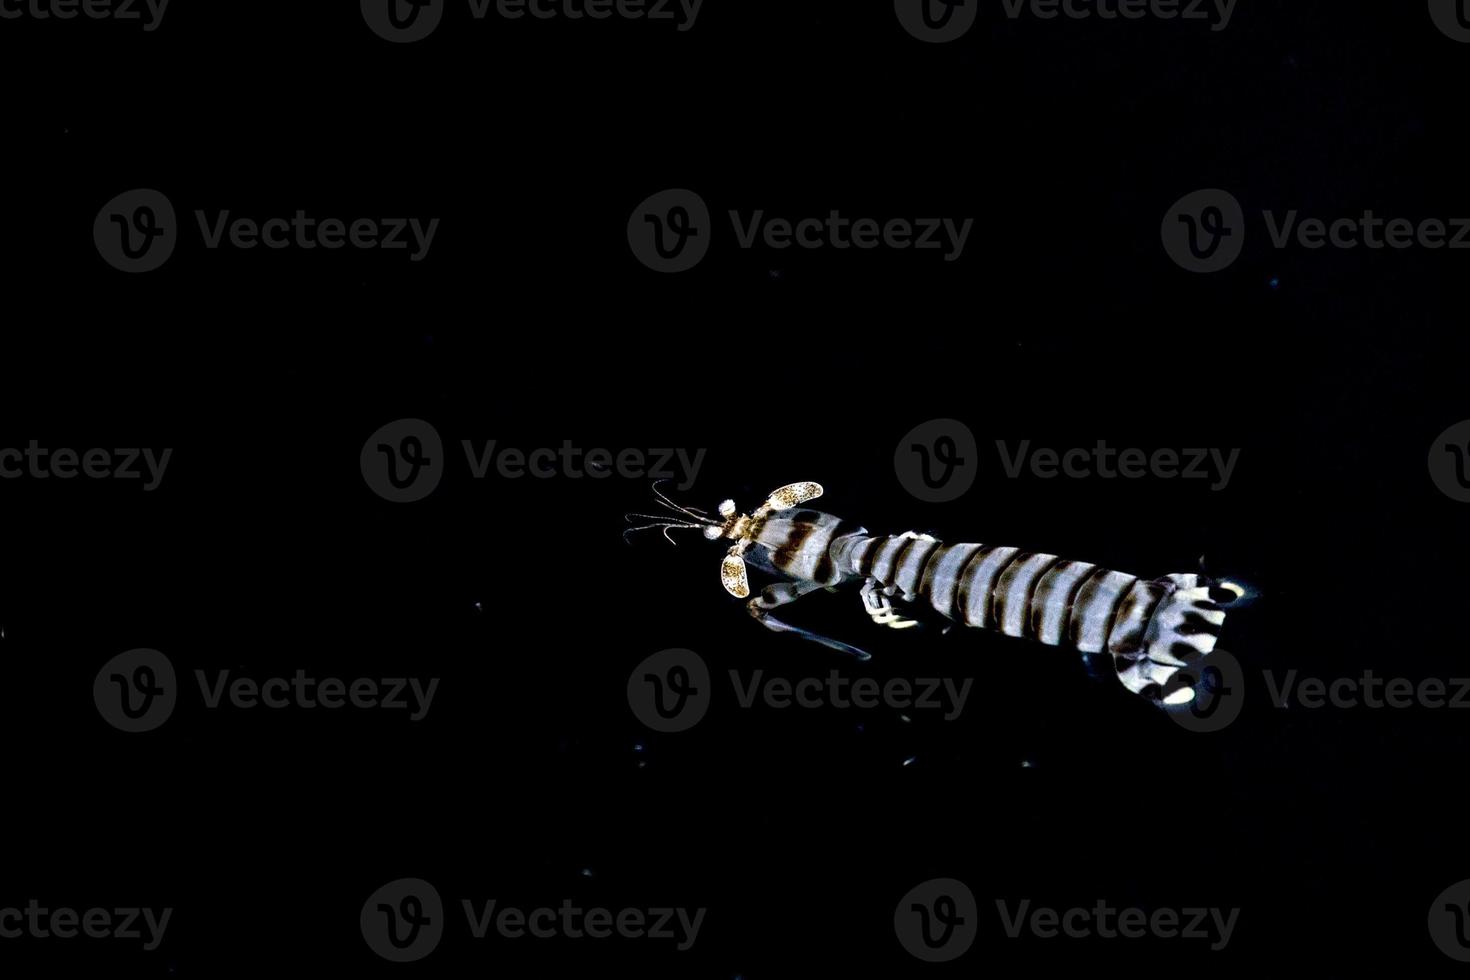 White lobster while hunting on black sea at night photo